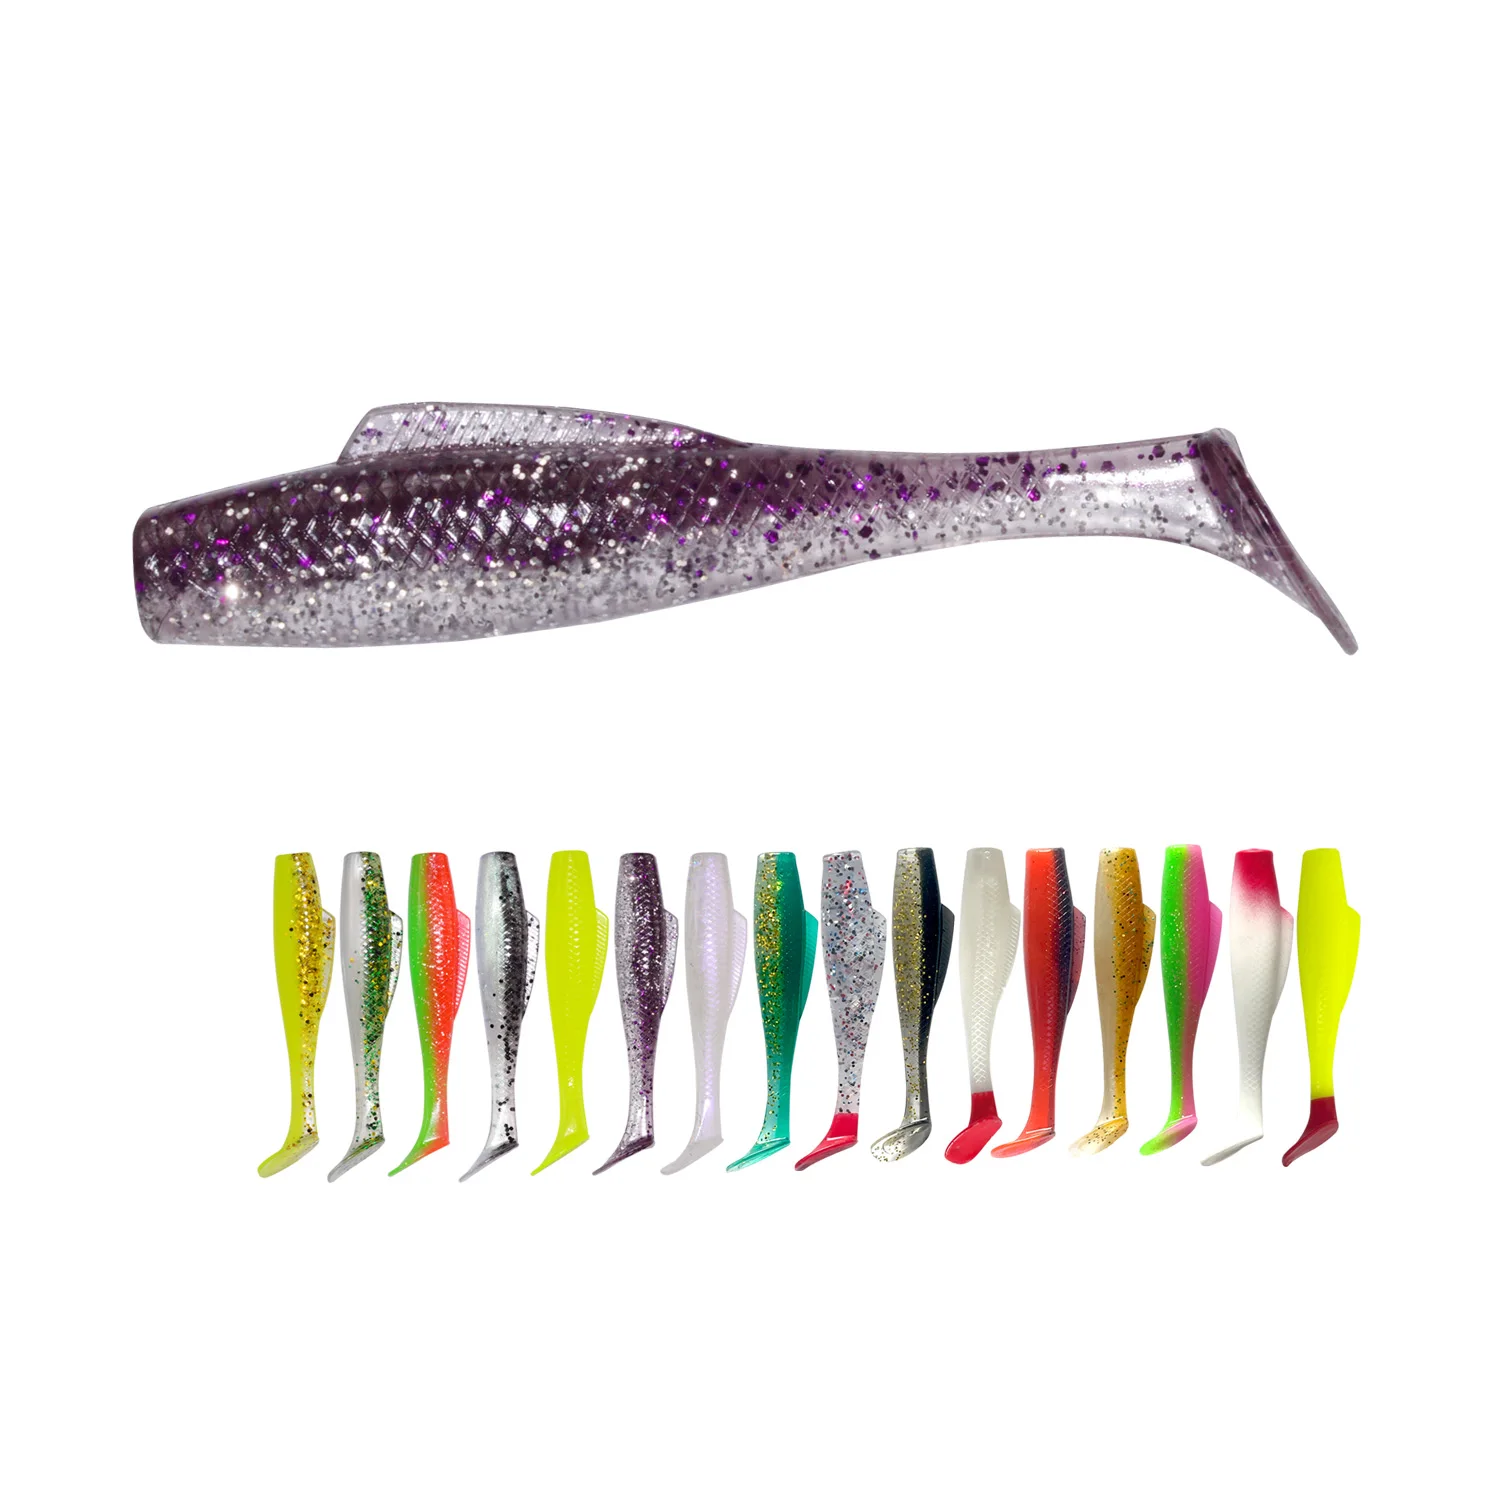 

fishing bait 4pcs/bag 85mm 5g Mixed Color Bionic bait soft TPR fishing Simulated soft shade lure, 7 different colors for choice